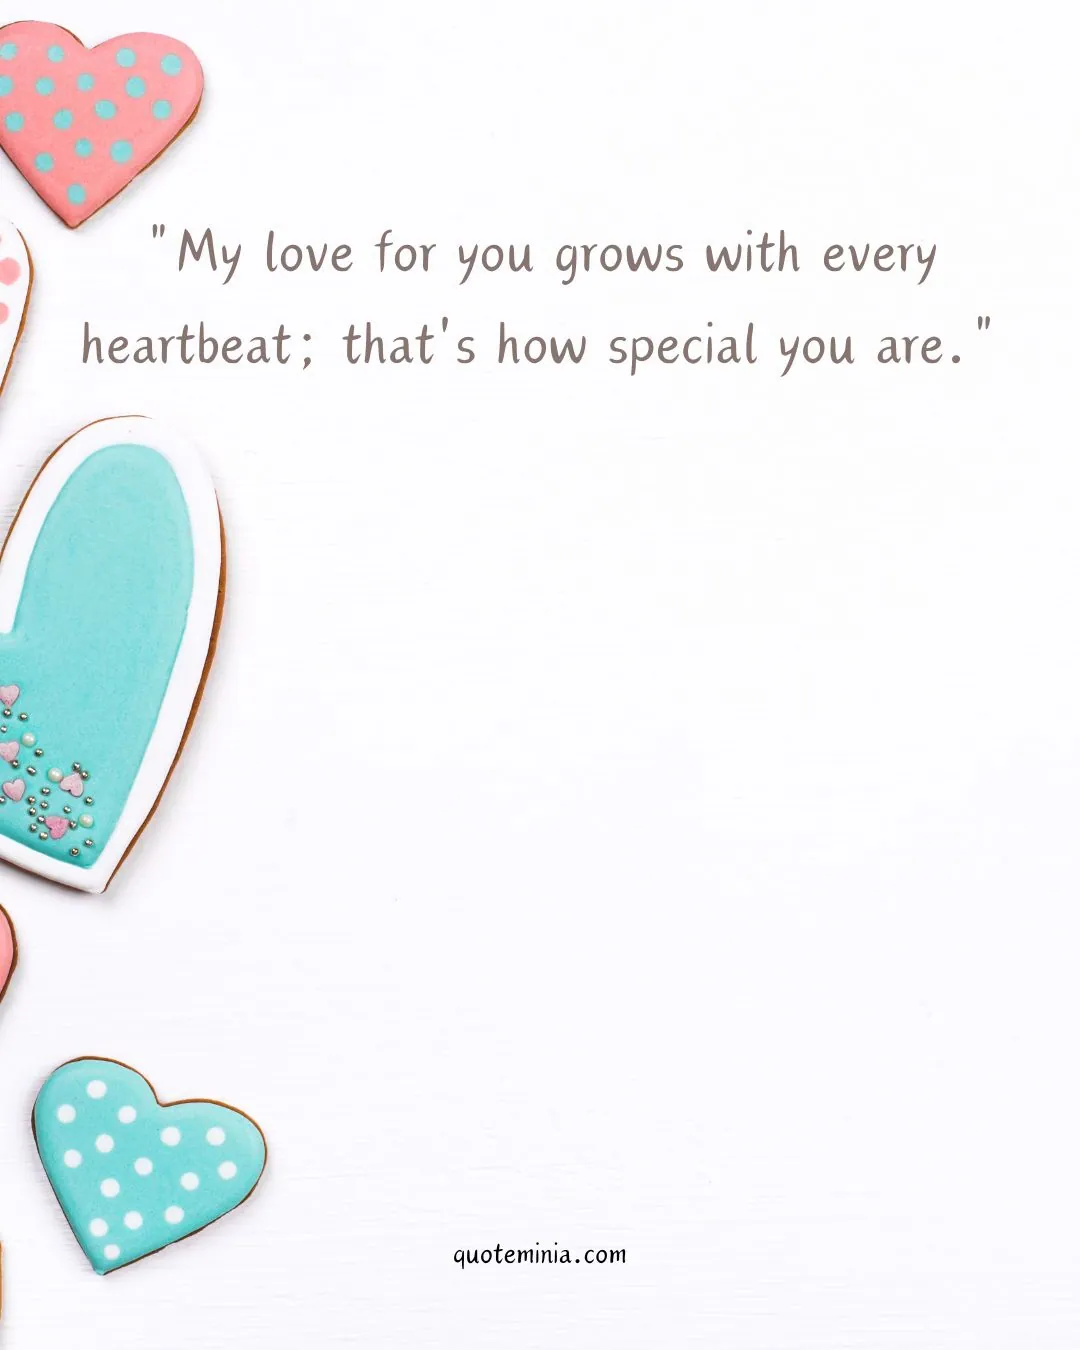 You Are Special Quotes For Him Image (1)